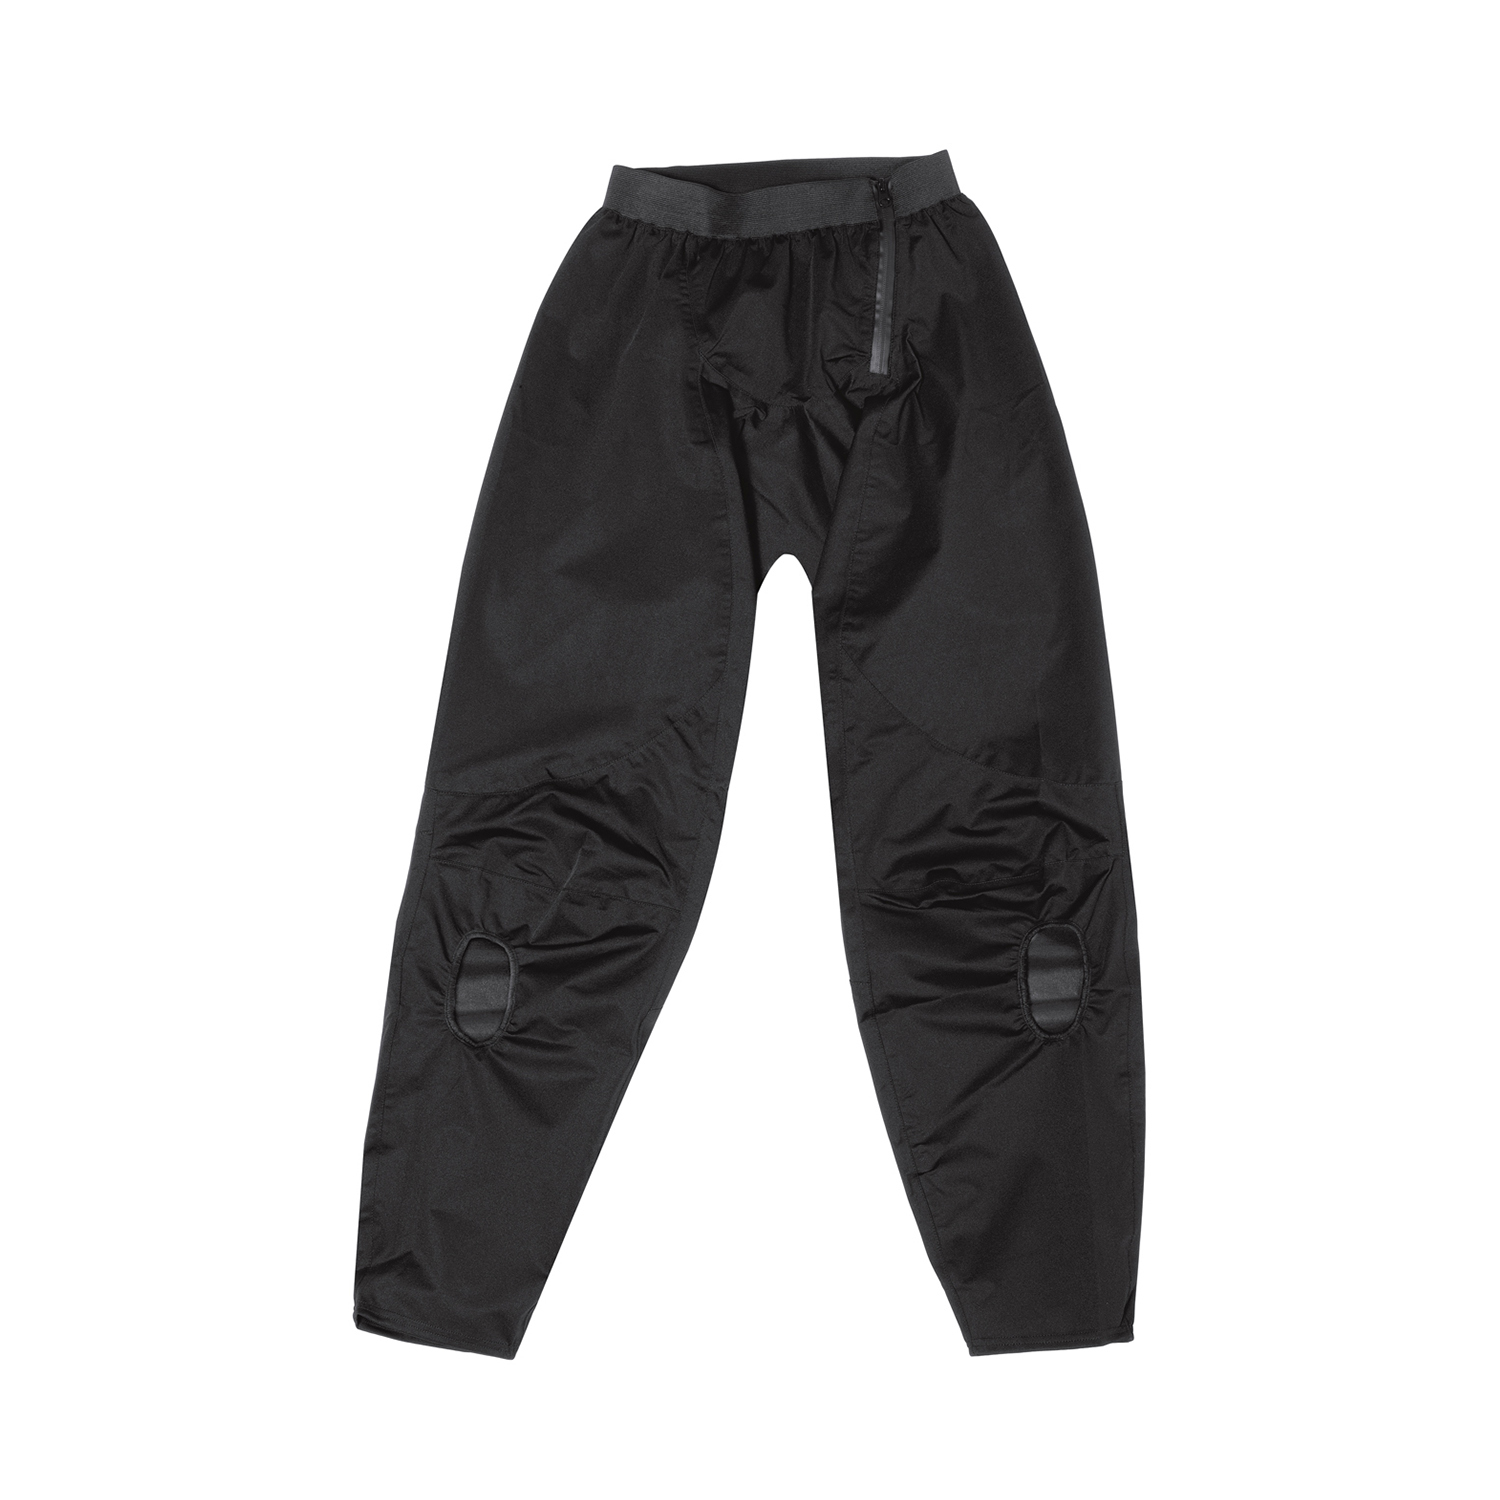 Held Wet Race Pants Black - Available in Various Sizes